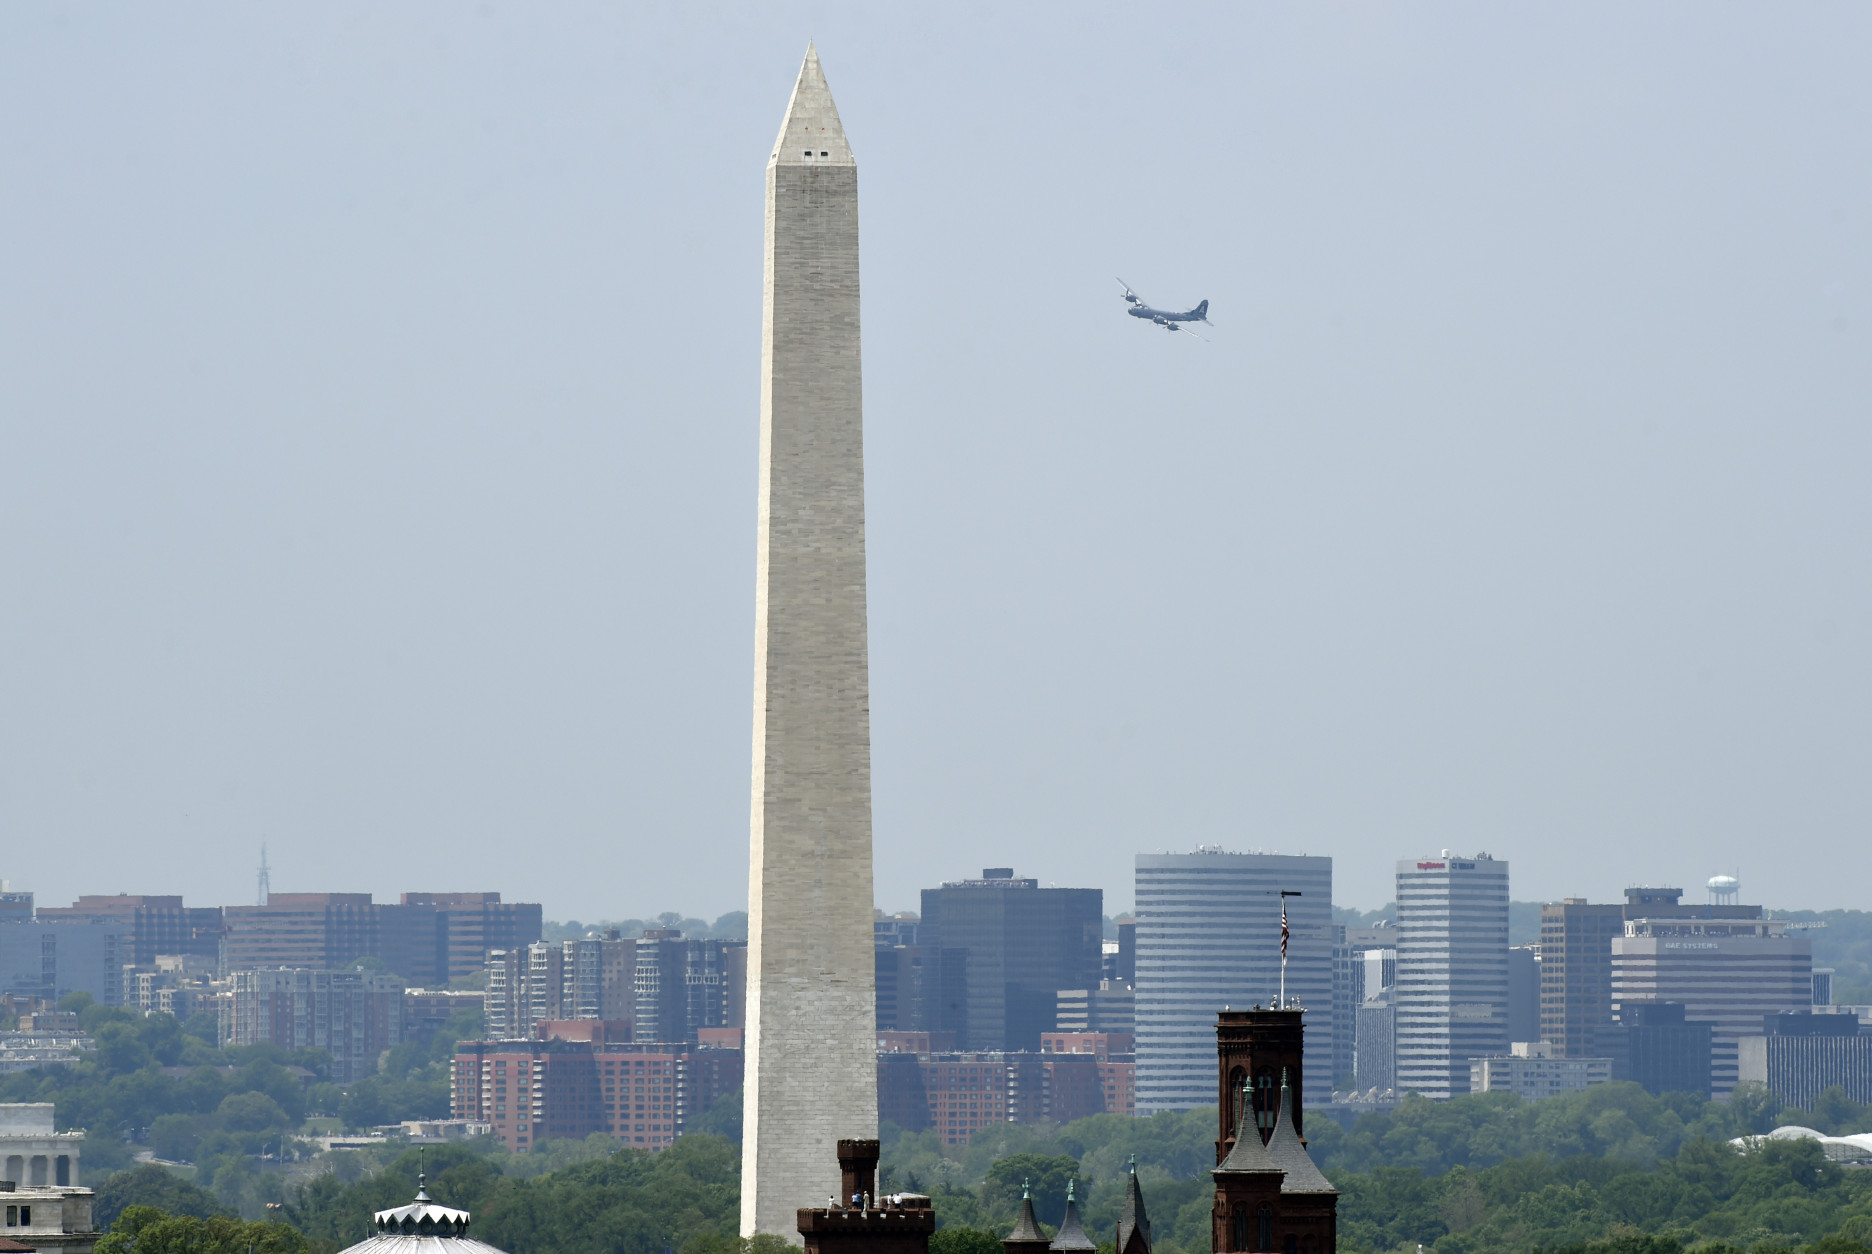 A B-29 Superfortress named "Fifi" and the plane that dropped the atomic bomb, flies over the skies of Washington, Friday, May 8, 2015. Dozens of vintage military aircraft from World War II made the flight over the nation's capital to mark the 70th anniversary of Victory in Europe Day. (AP Photo/Susan Walsh)